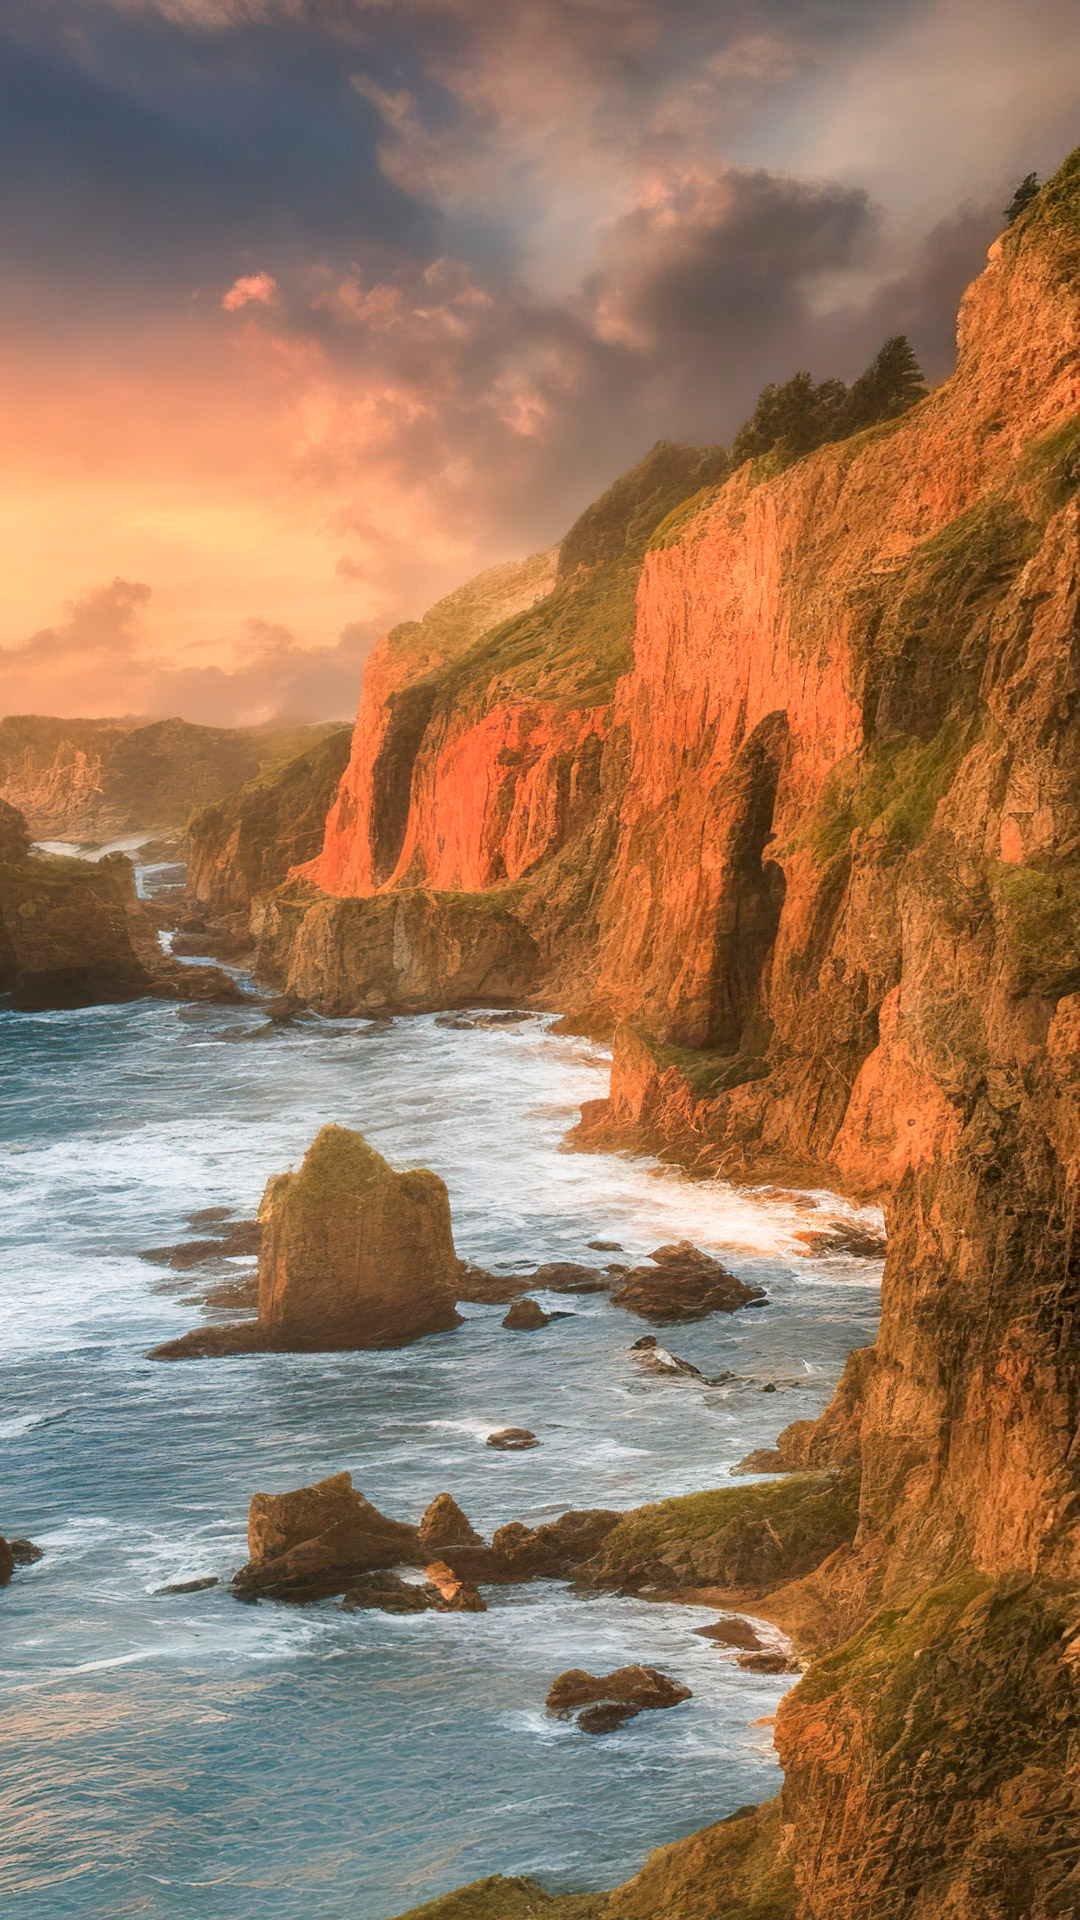 Download HD Android  nature wallpaper in 1080p, featuring a stunning coastal view with rugged cliffs, crashing waves, and a fiery sunset.